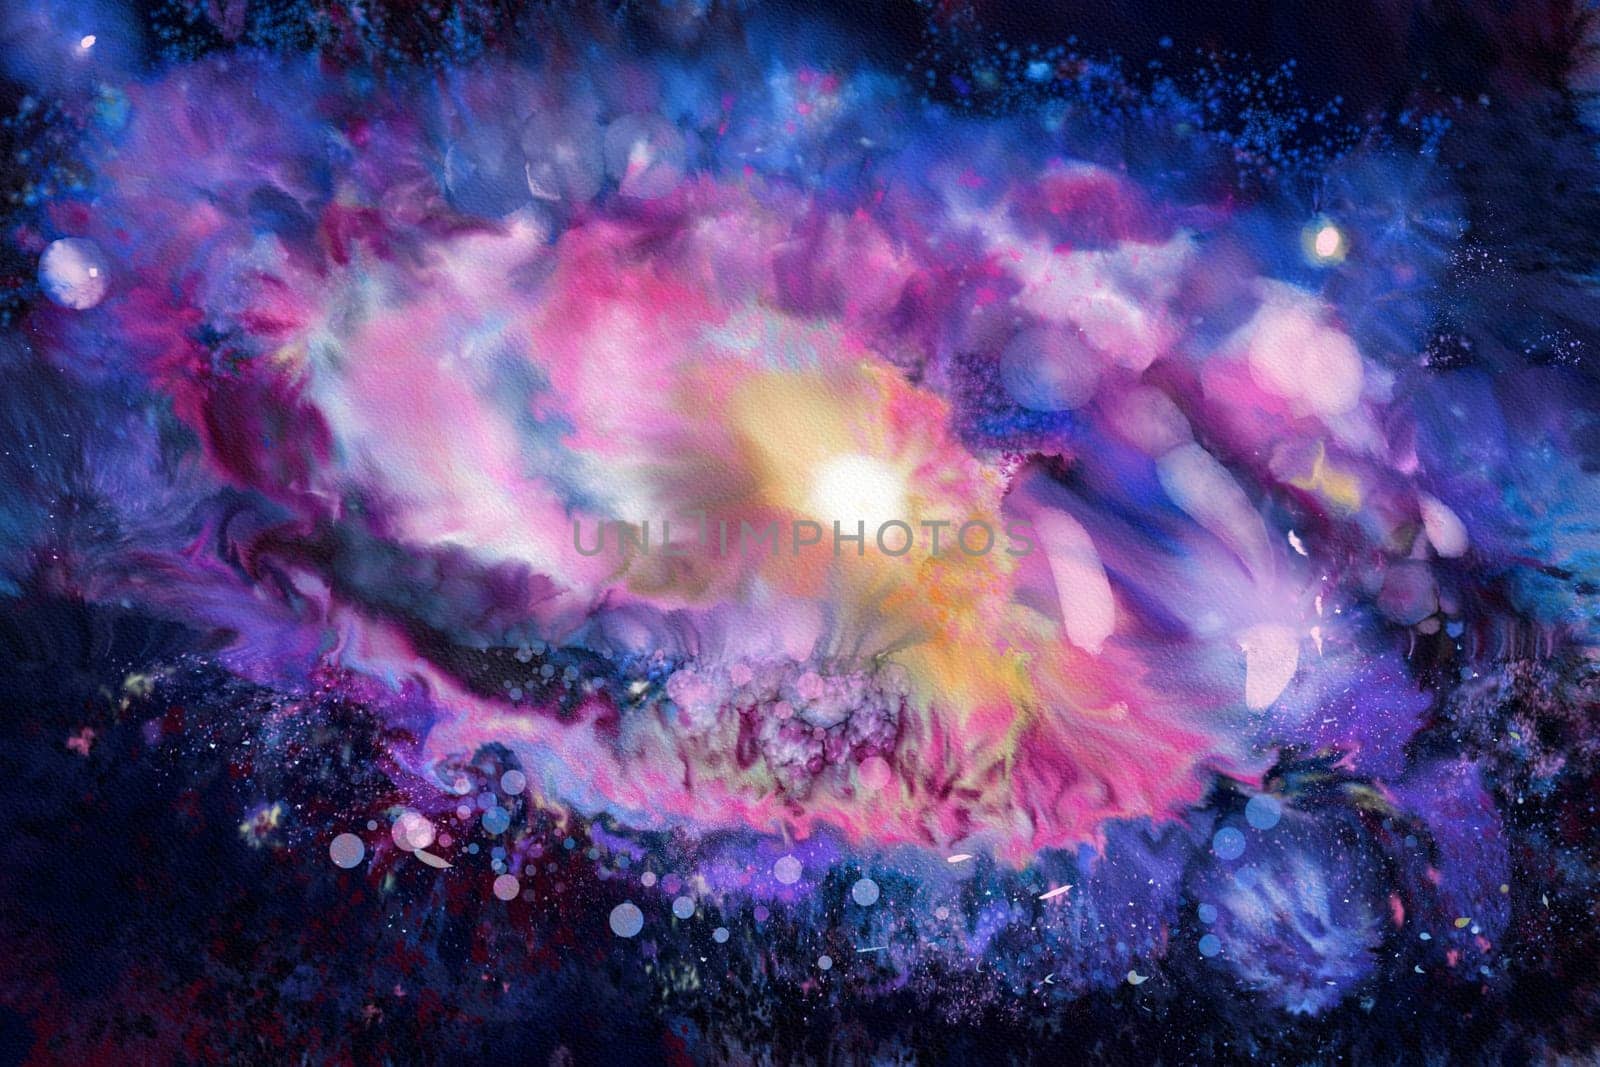 Celestial Watercolor: Exploring Space and Galaxies, watercolor space background, Digital painting.